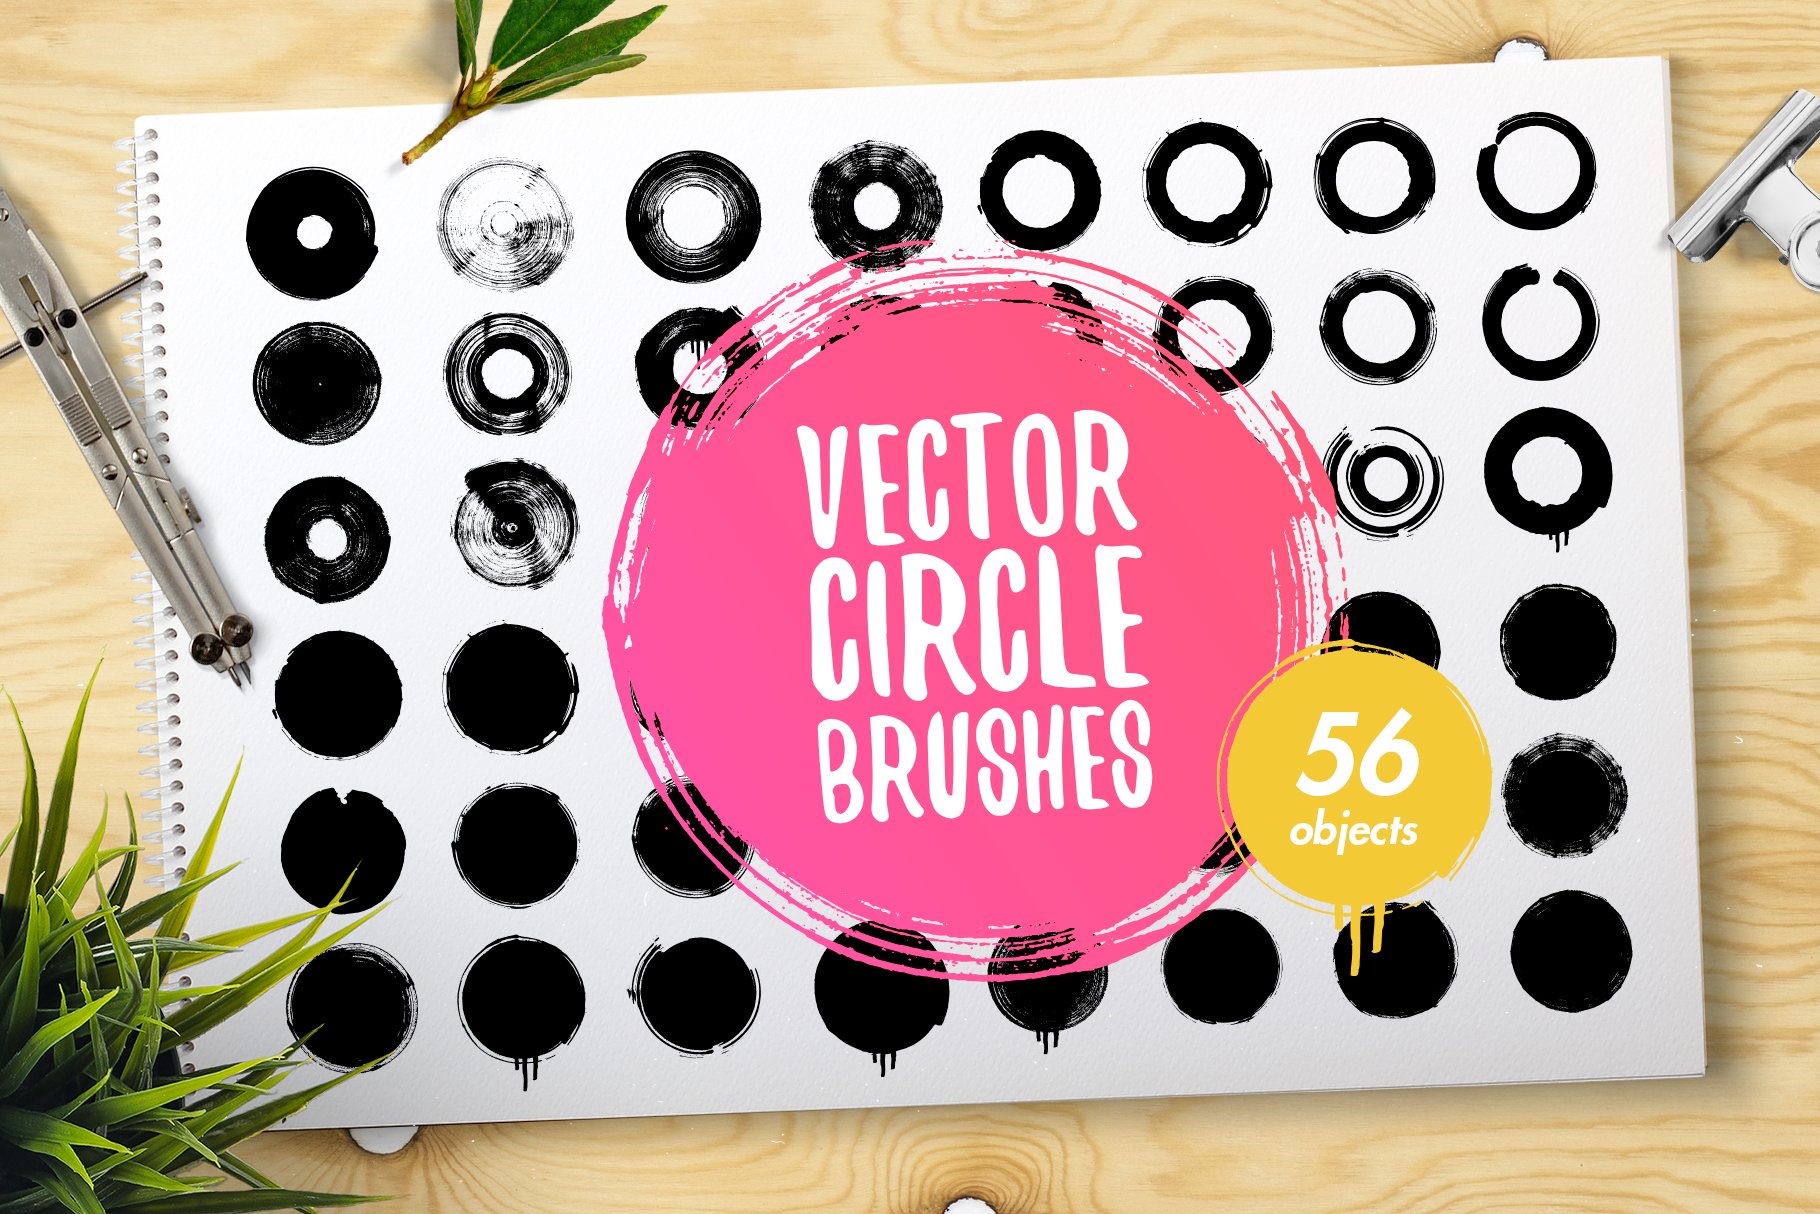 Vector circle brushescover image.